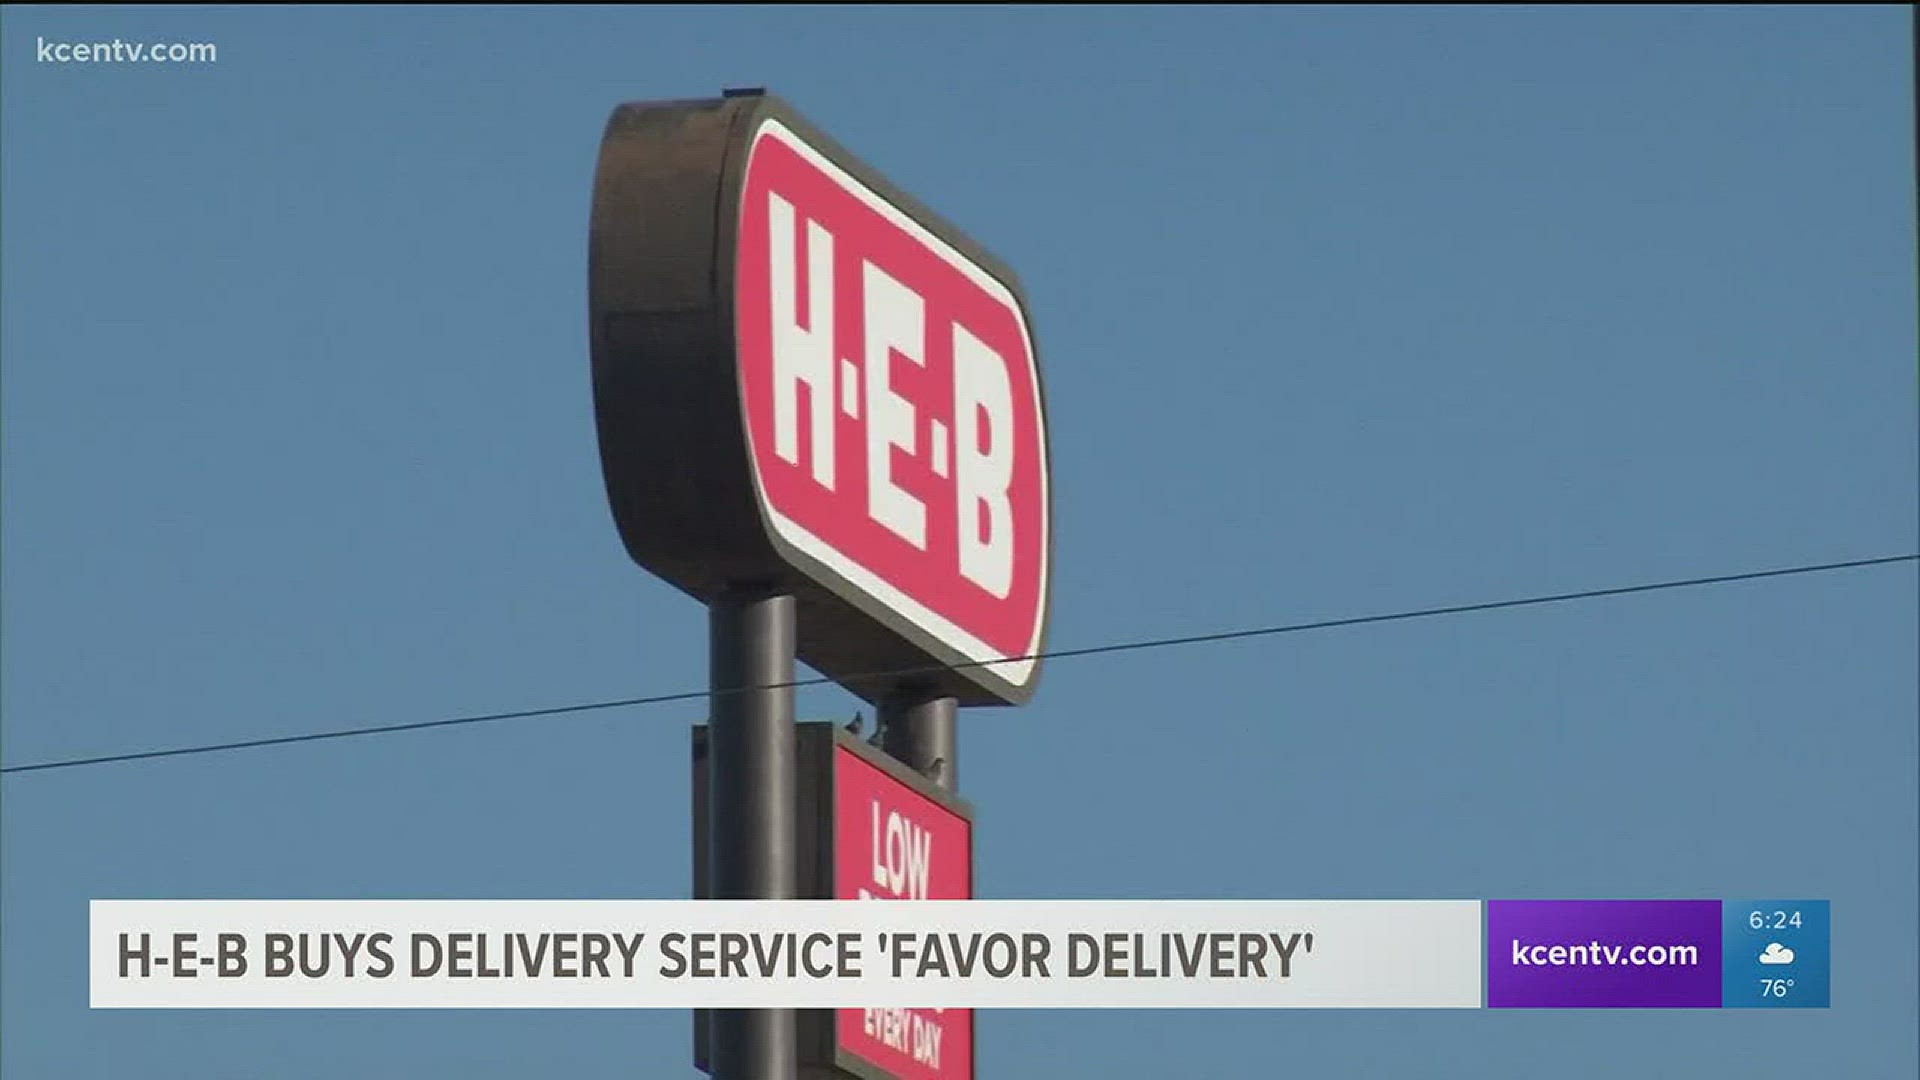 H-E-B announced it purchased Austin-based on-demand delivery service "Favor Delivery."